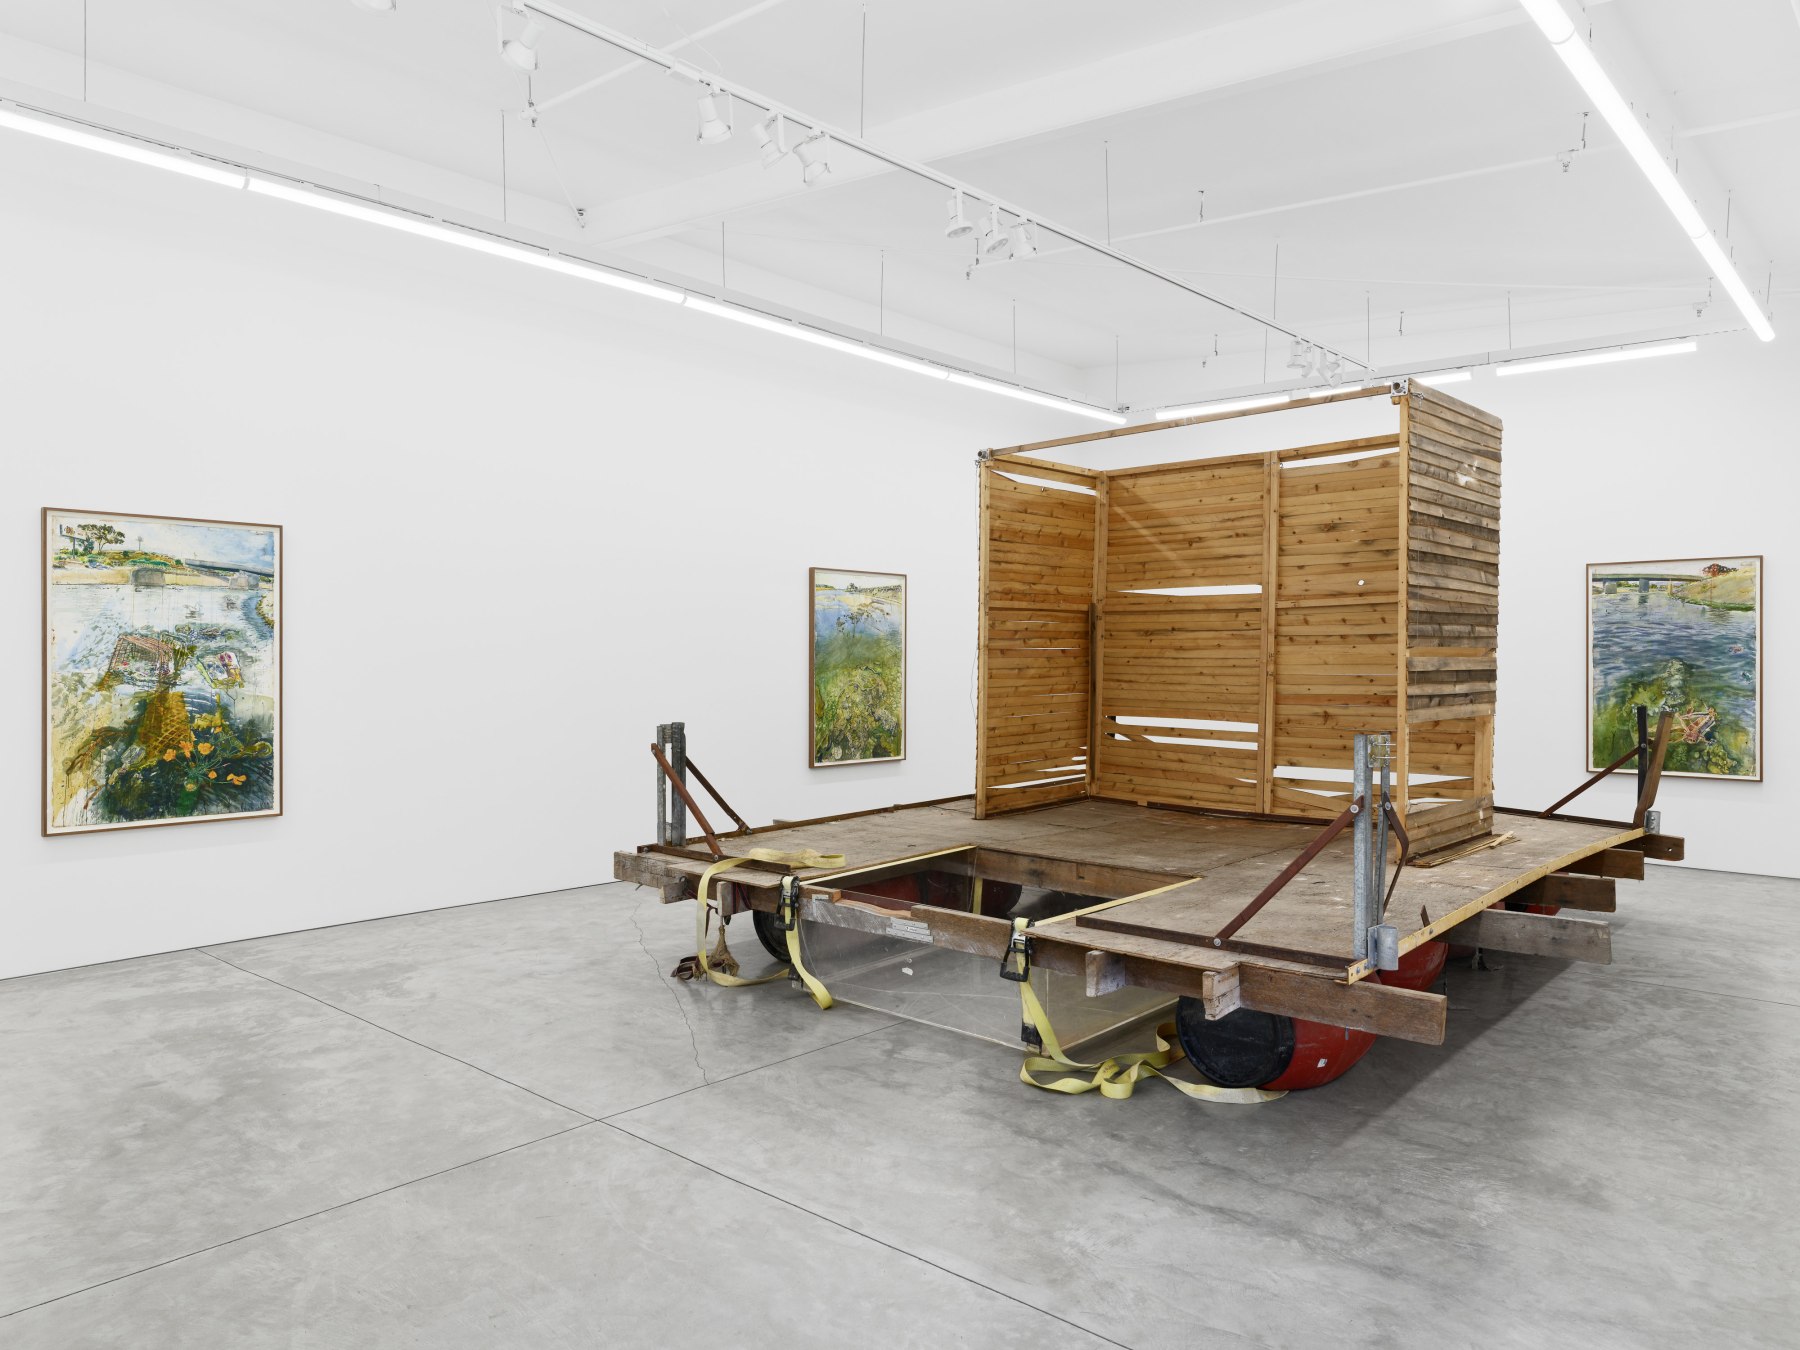 Installation view of Sterling Wells' "A New Flood", Night Gallery, Los Angeles.